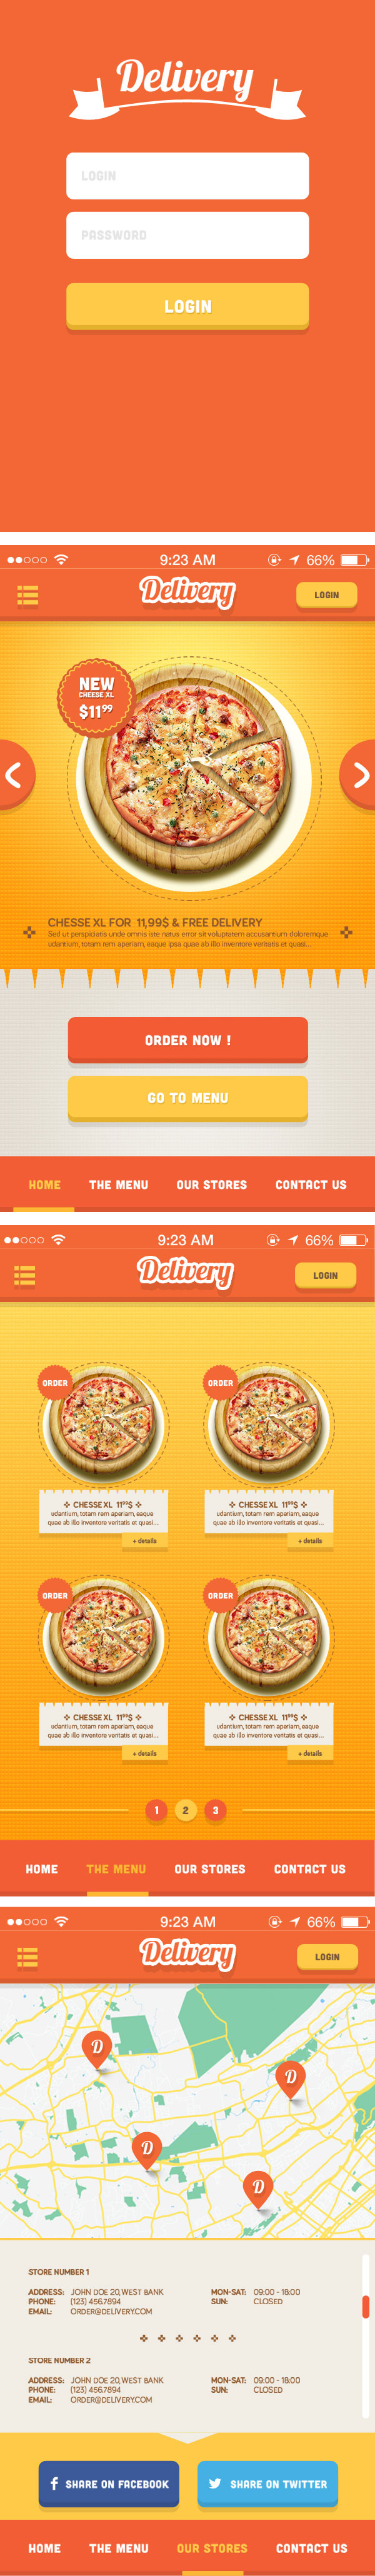 Delivery-App-for-iPhone-UI-Kit-PSD